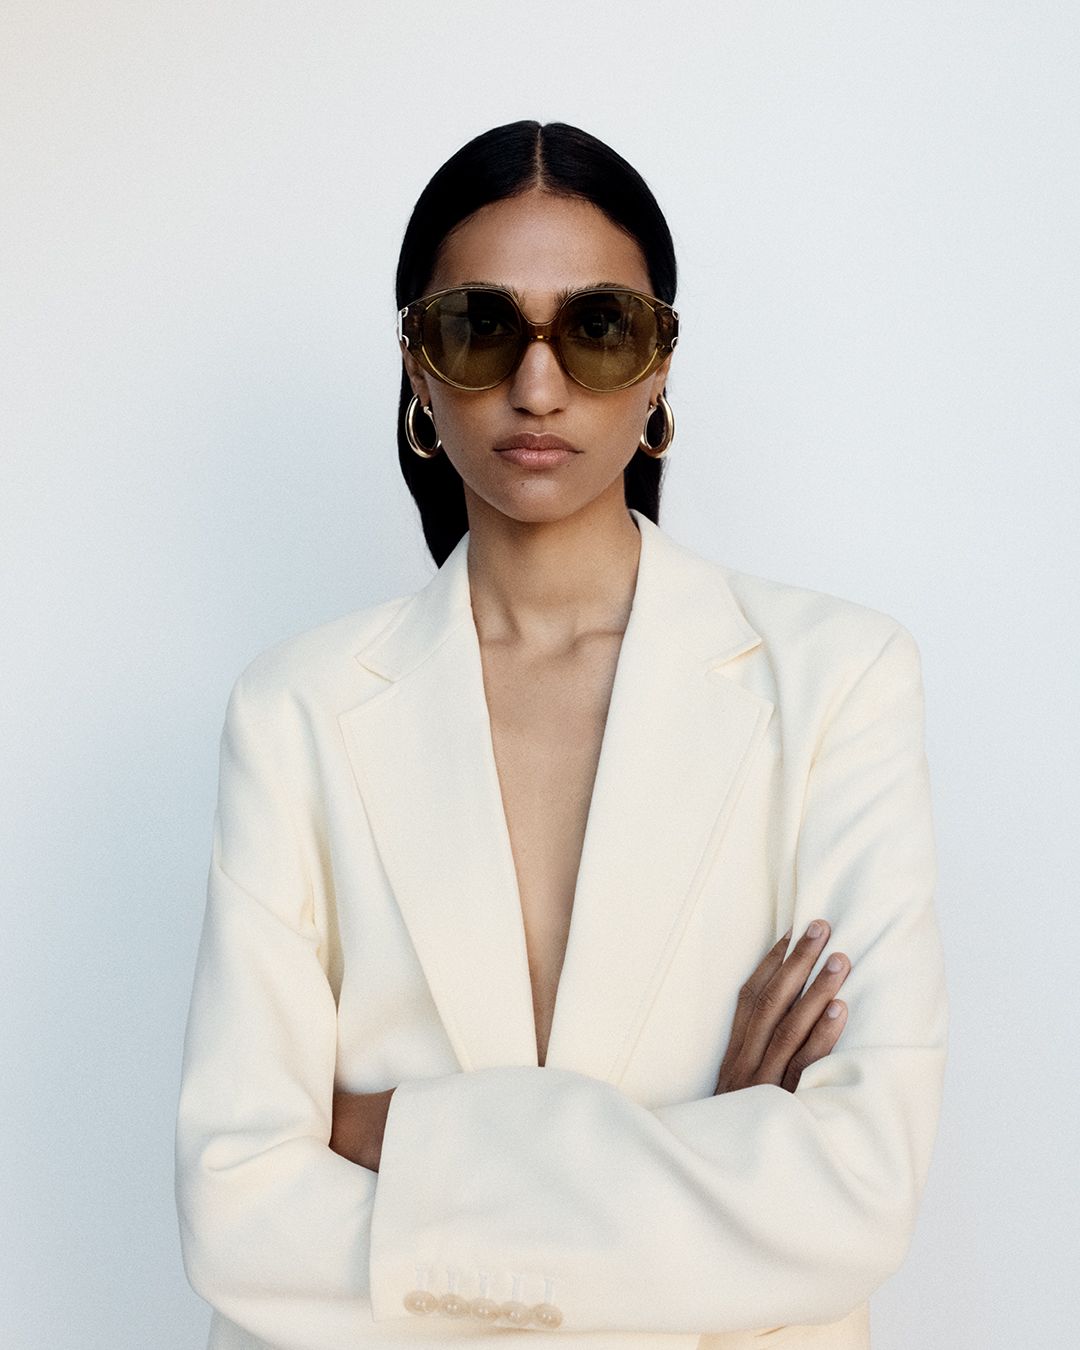 Model posing with arms crossed wearing khaki round sunglasses with a cream blazer